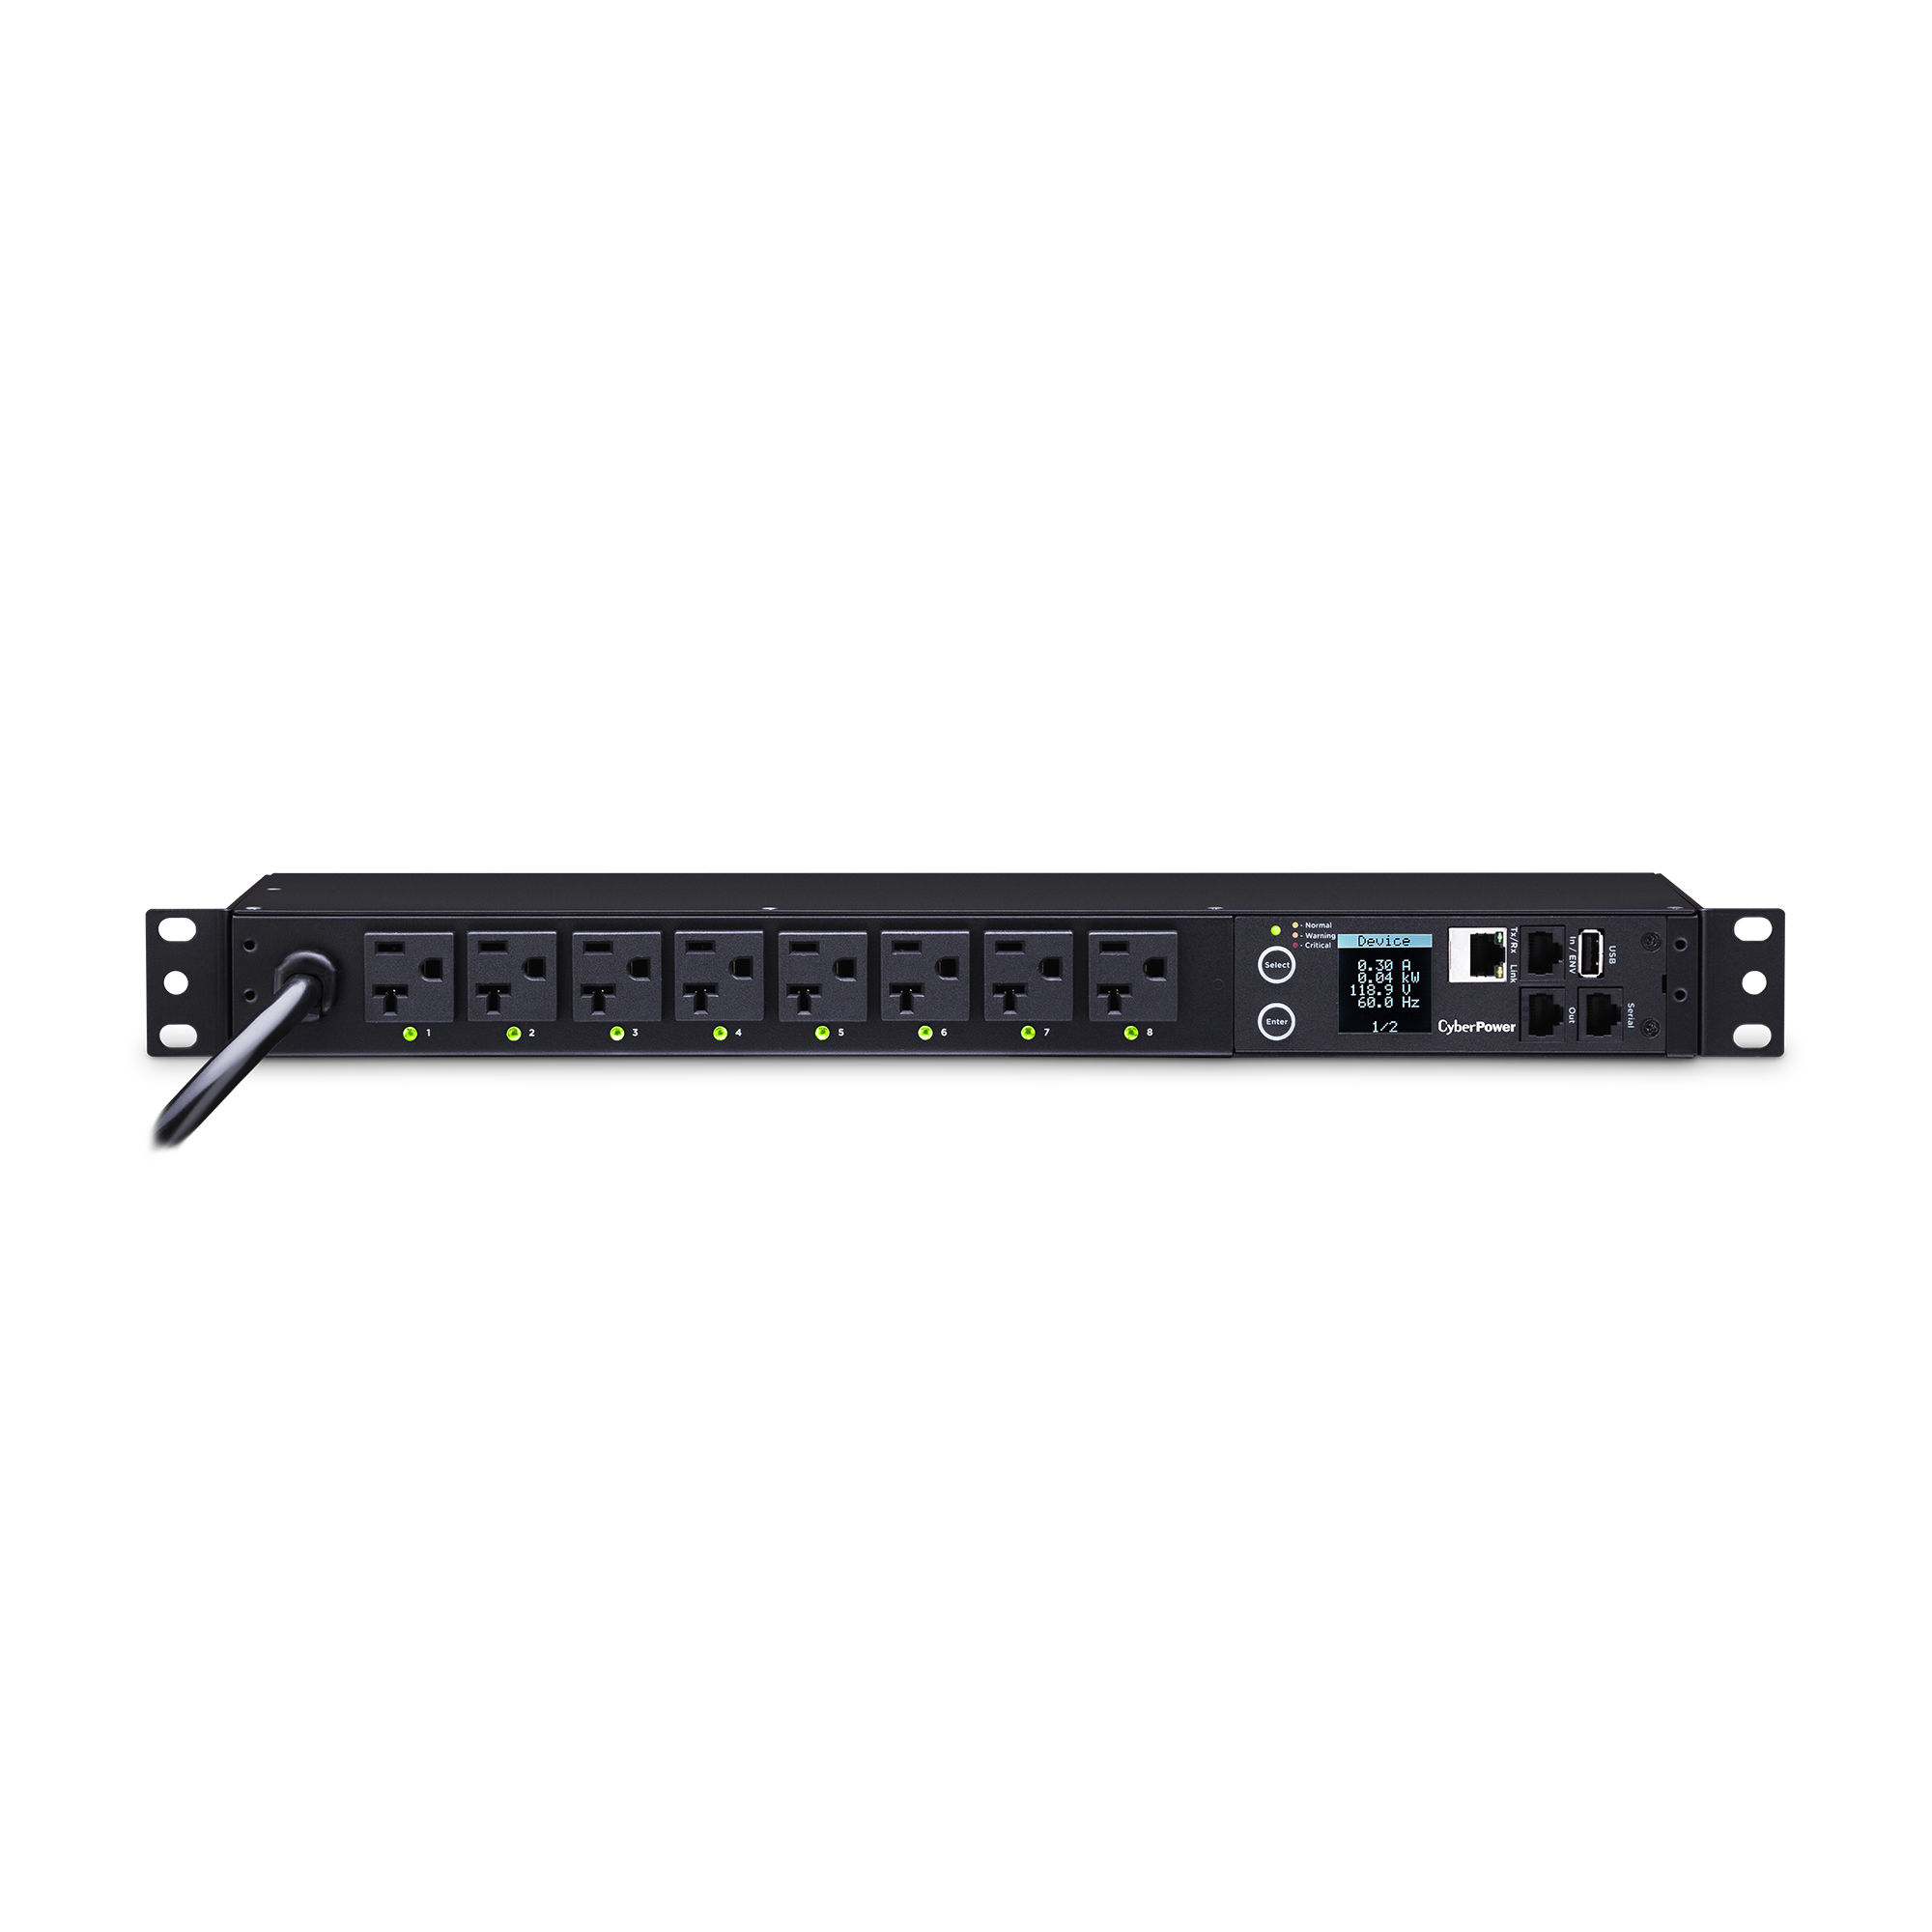 the part number is PDU41002